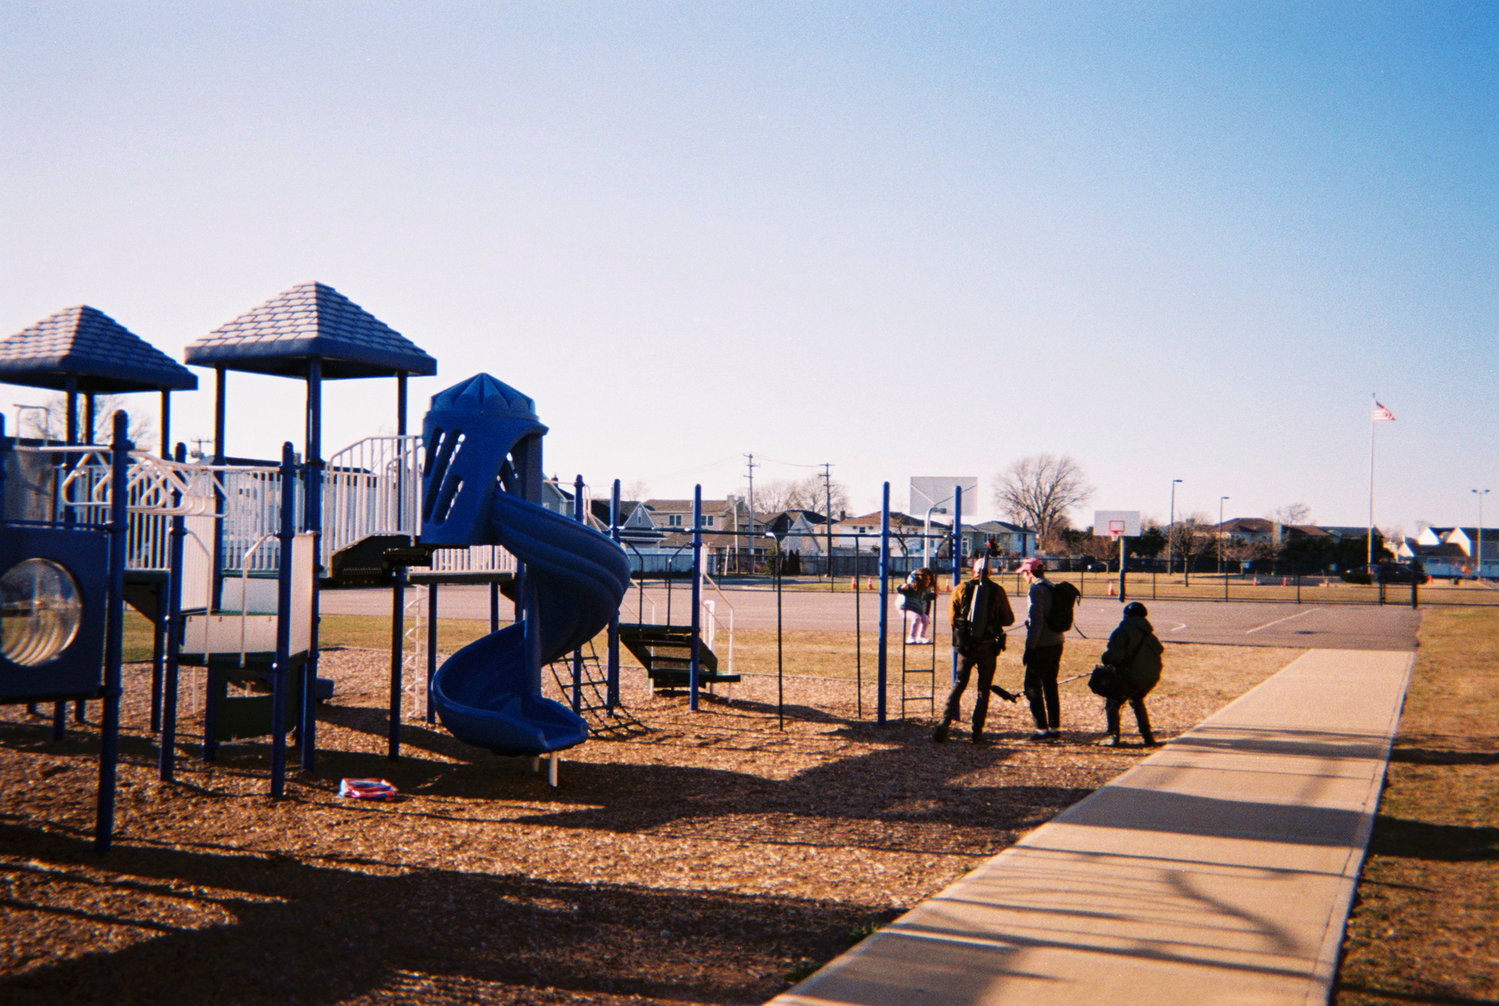 “Monkey Bars” was filmed in many places in Oceanside, including School No. 9E.